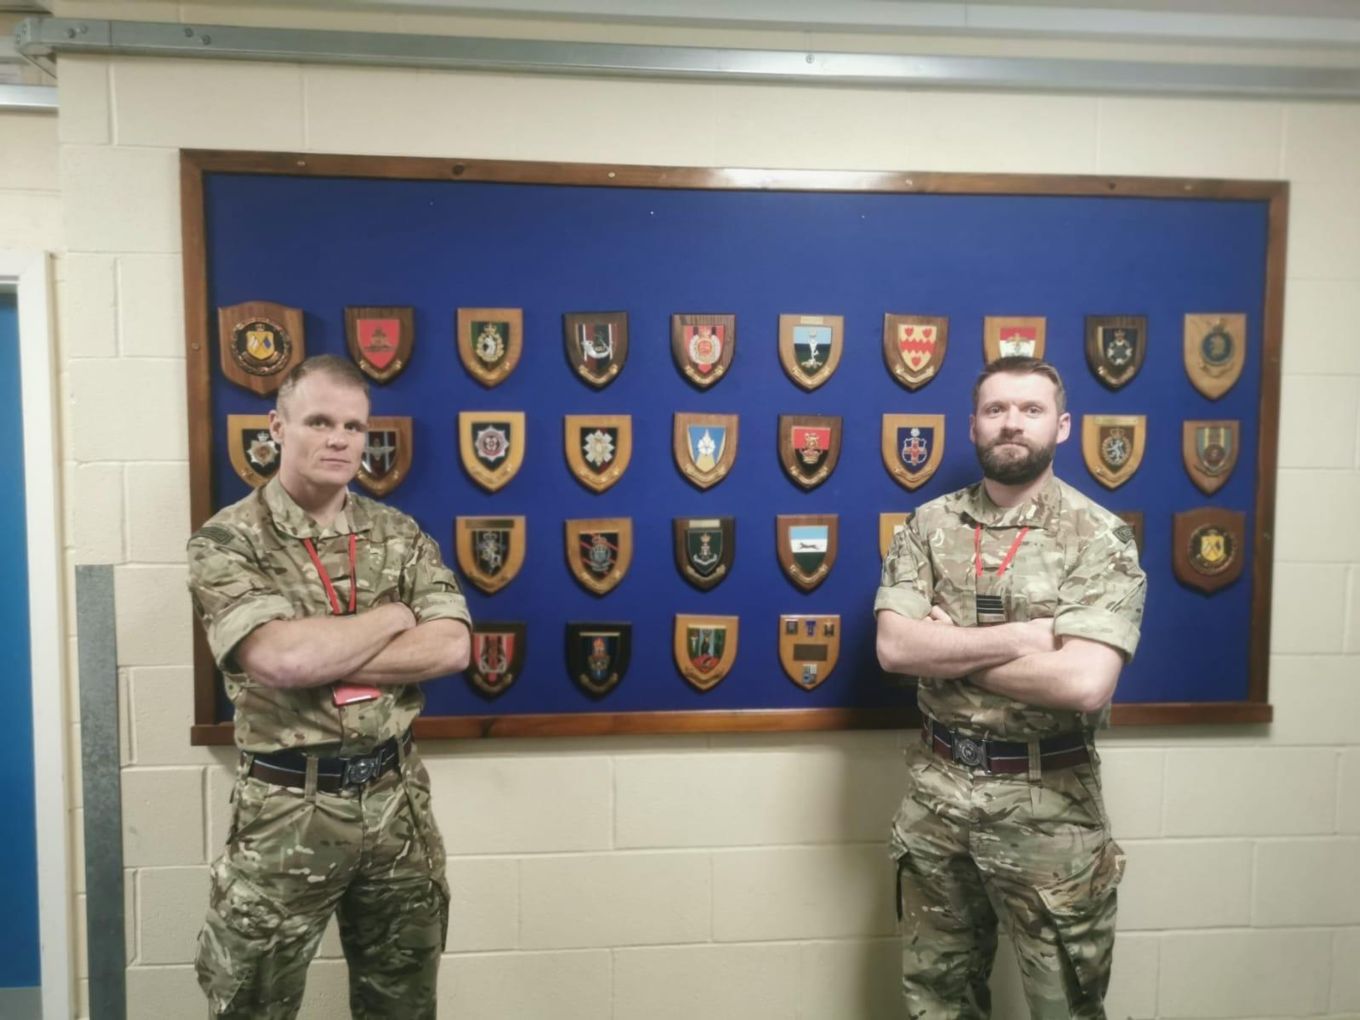 Image shows Flight Lieutenants Clarke and Coatsworth with their arms folded.